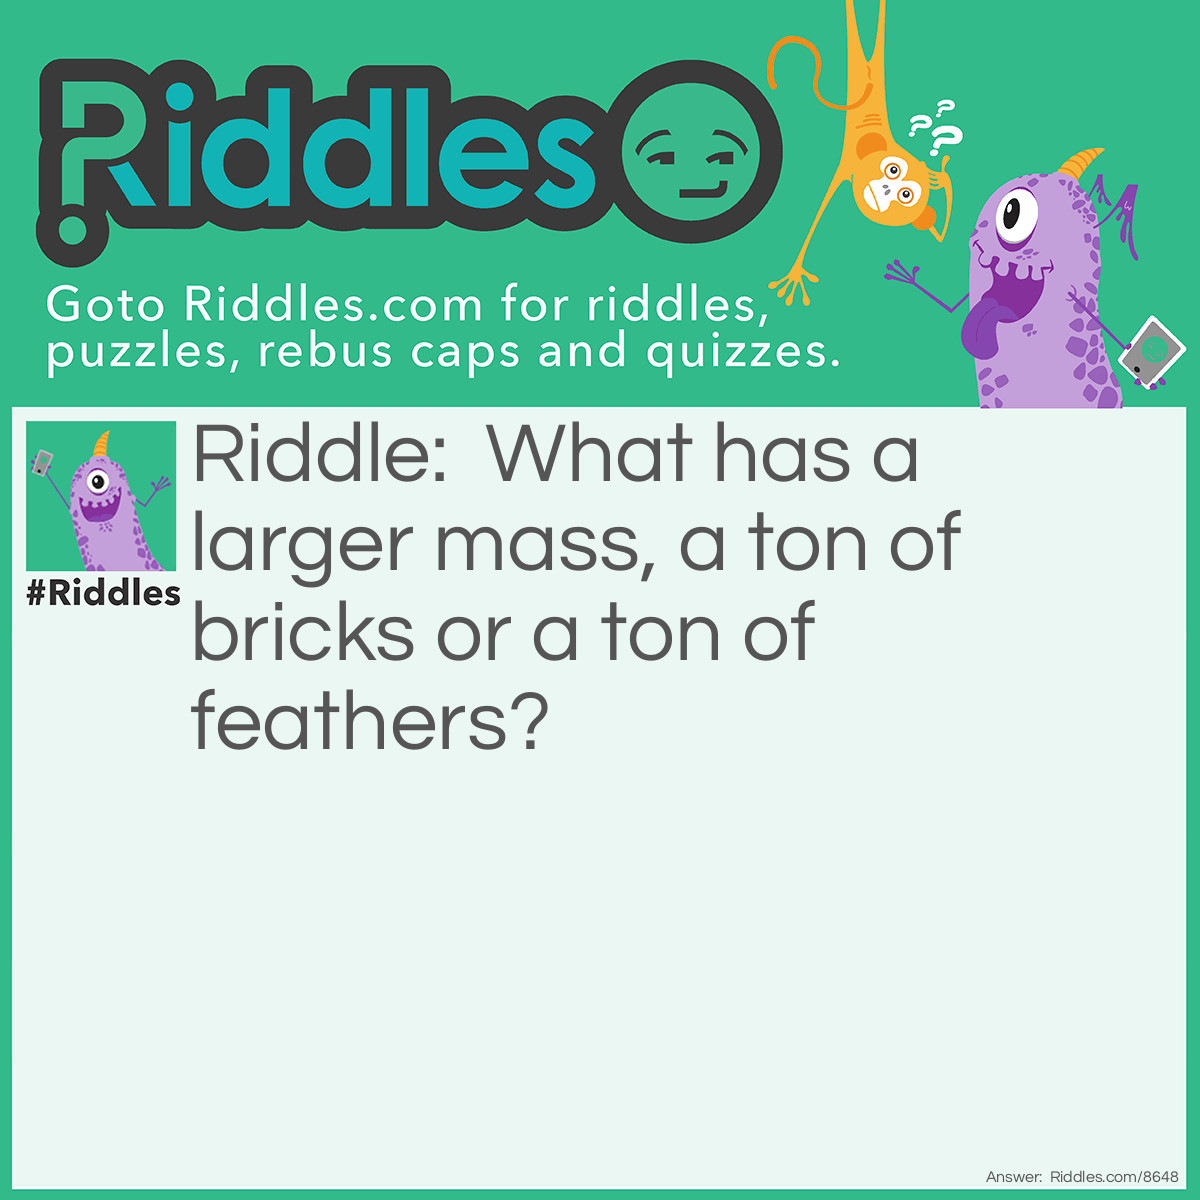 Riddle: What has a larger mass, a ton of bricks or a ton of feathers? Answer: A ton of feathers.